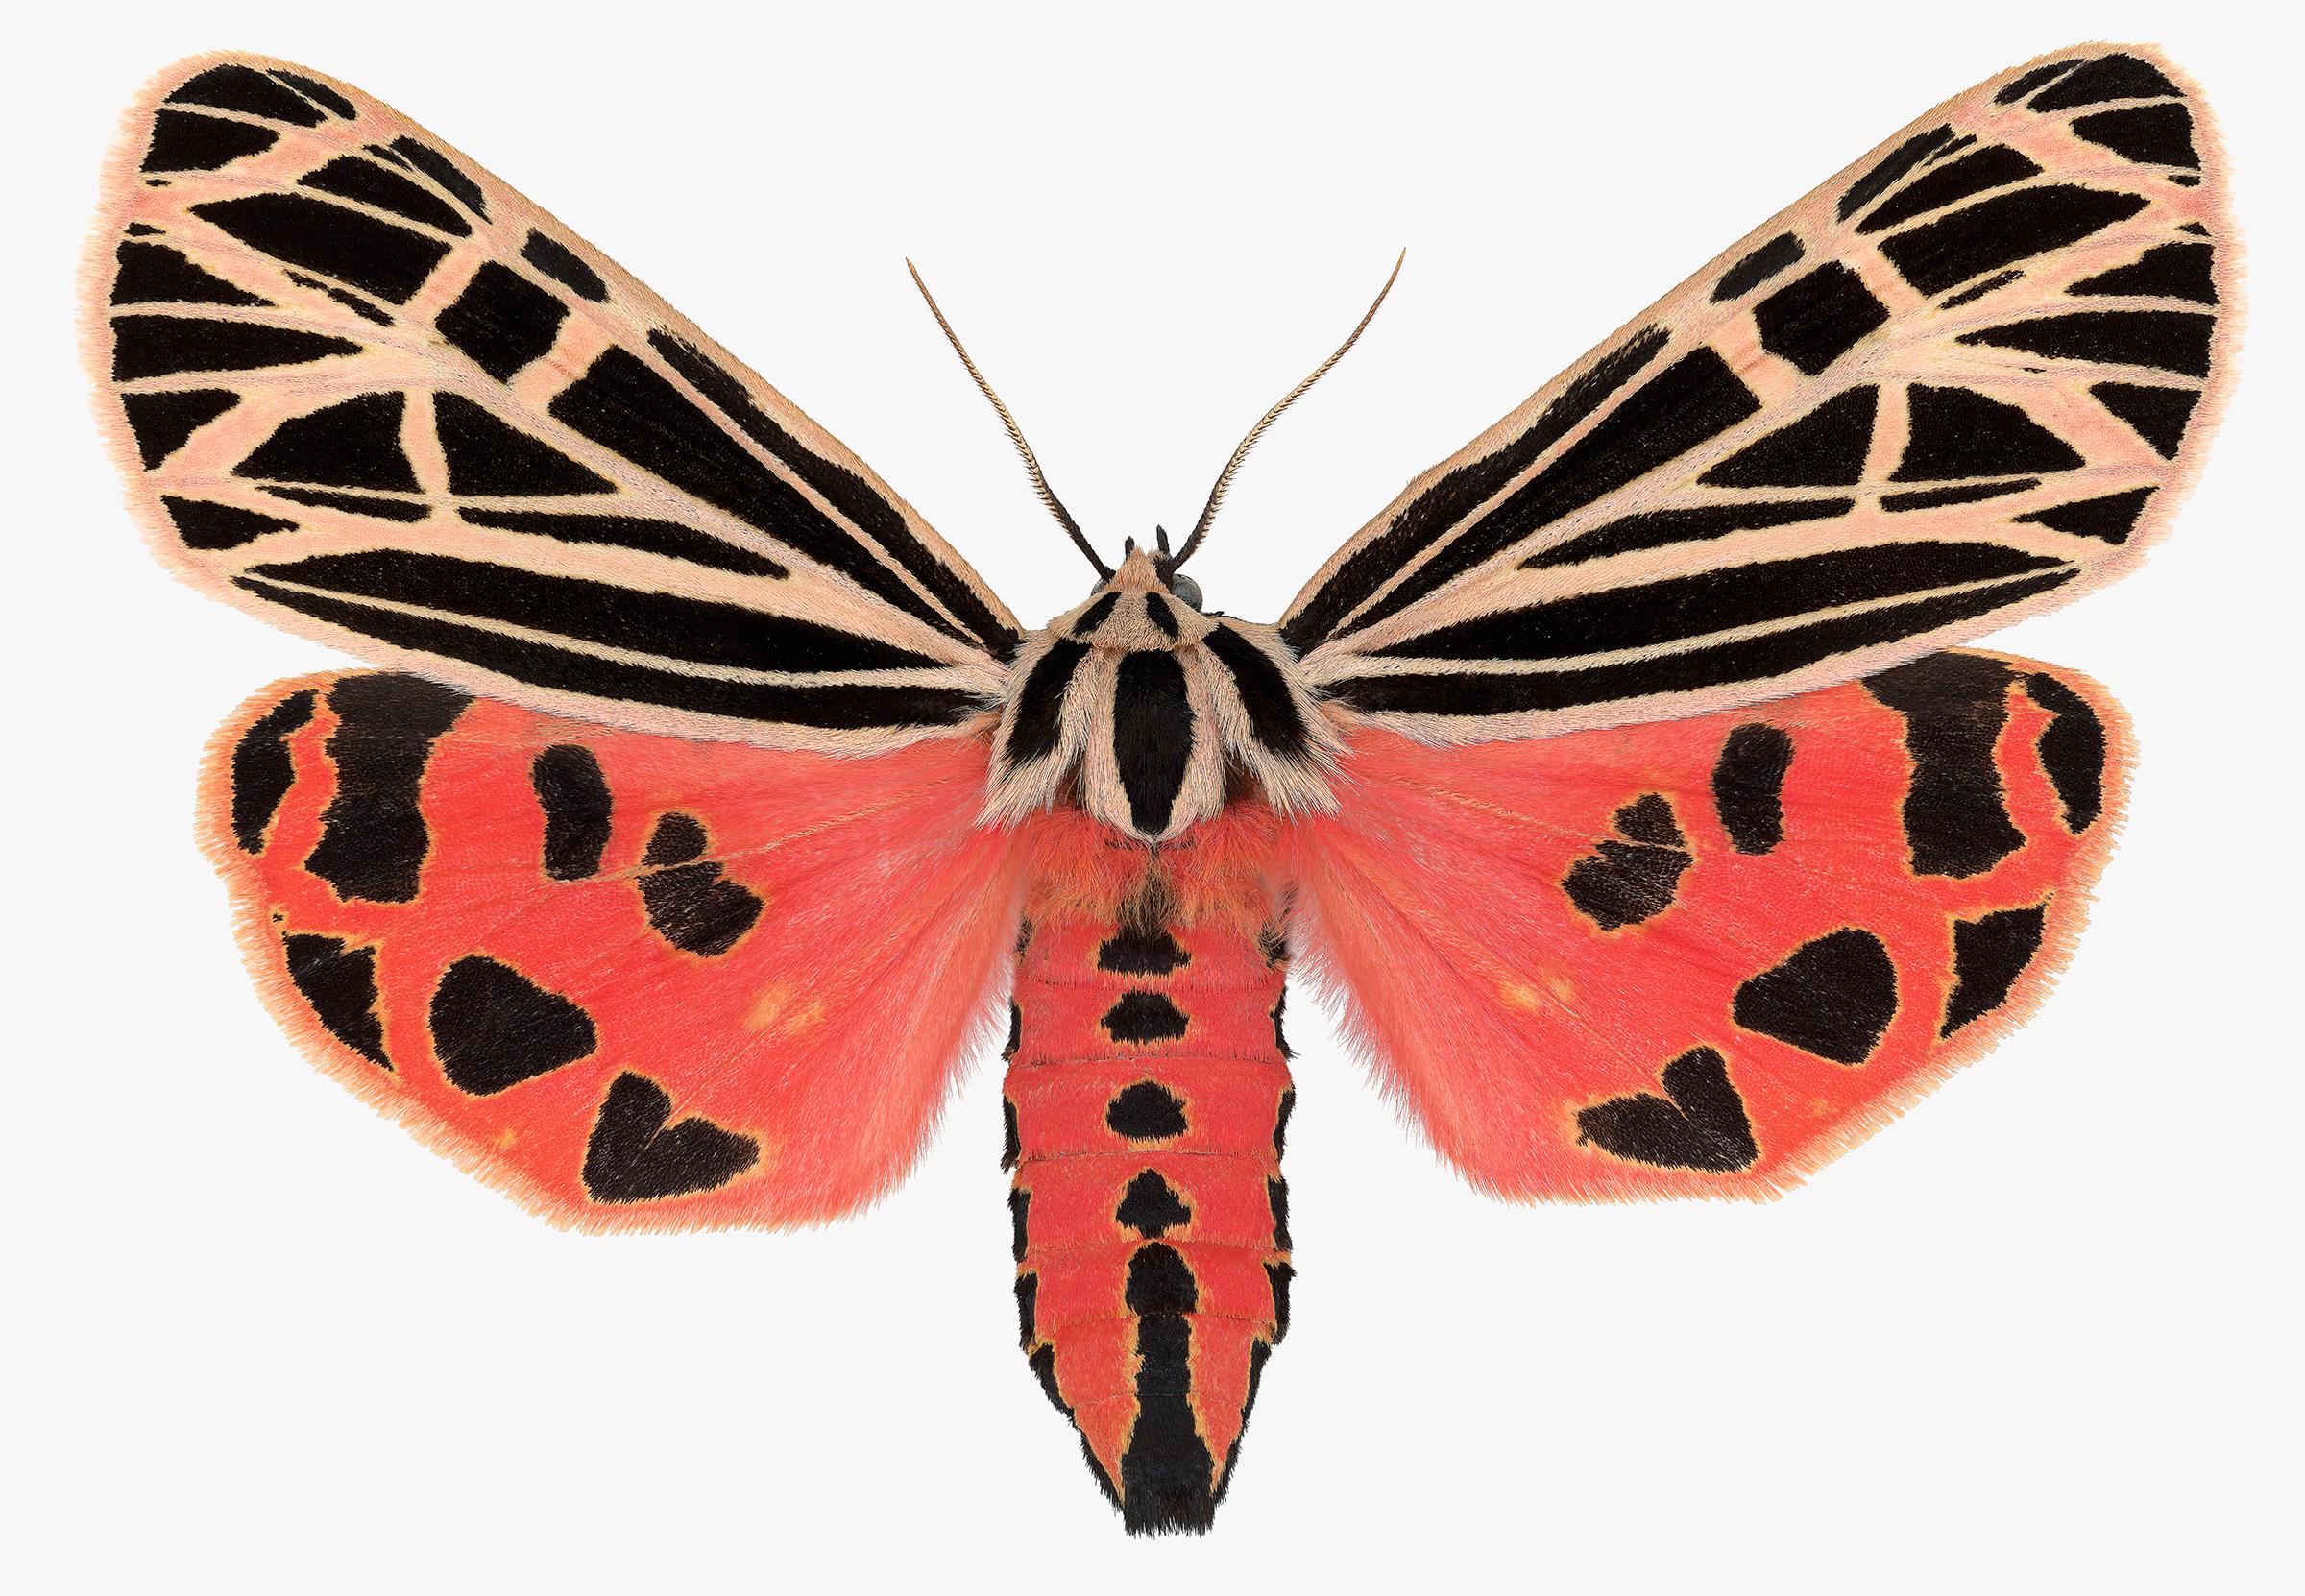 Joseph Scheer Color Photograph - Grammia Virgo Female, Coral Red, Black Peach Moth Insect Wings Nature Photograph